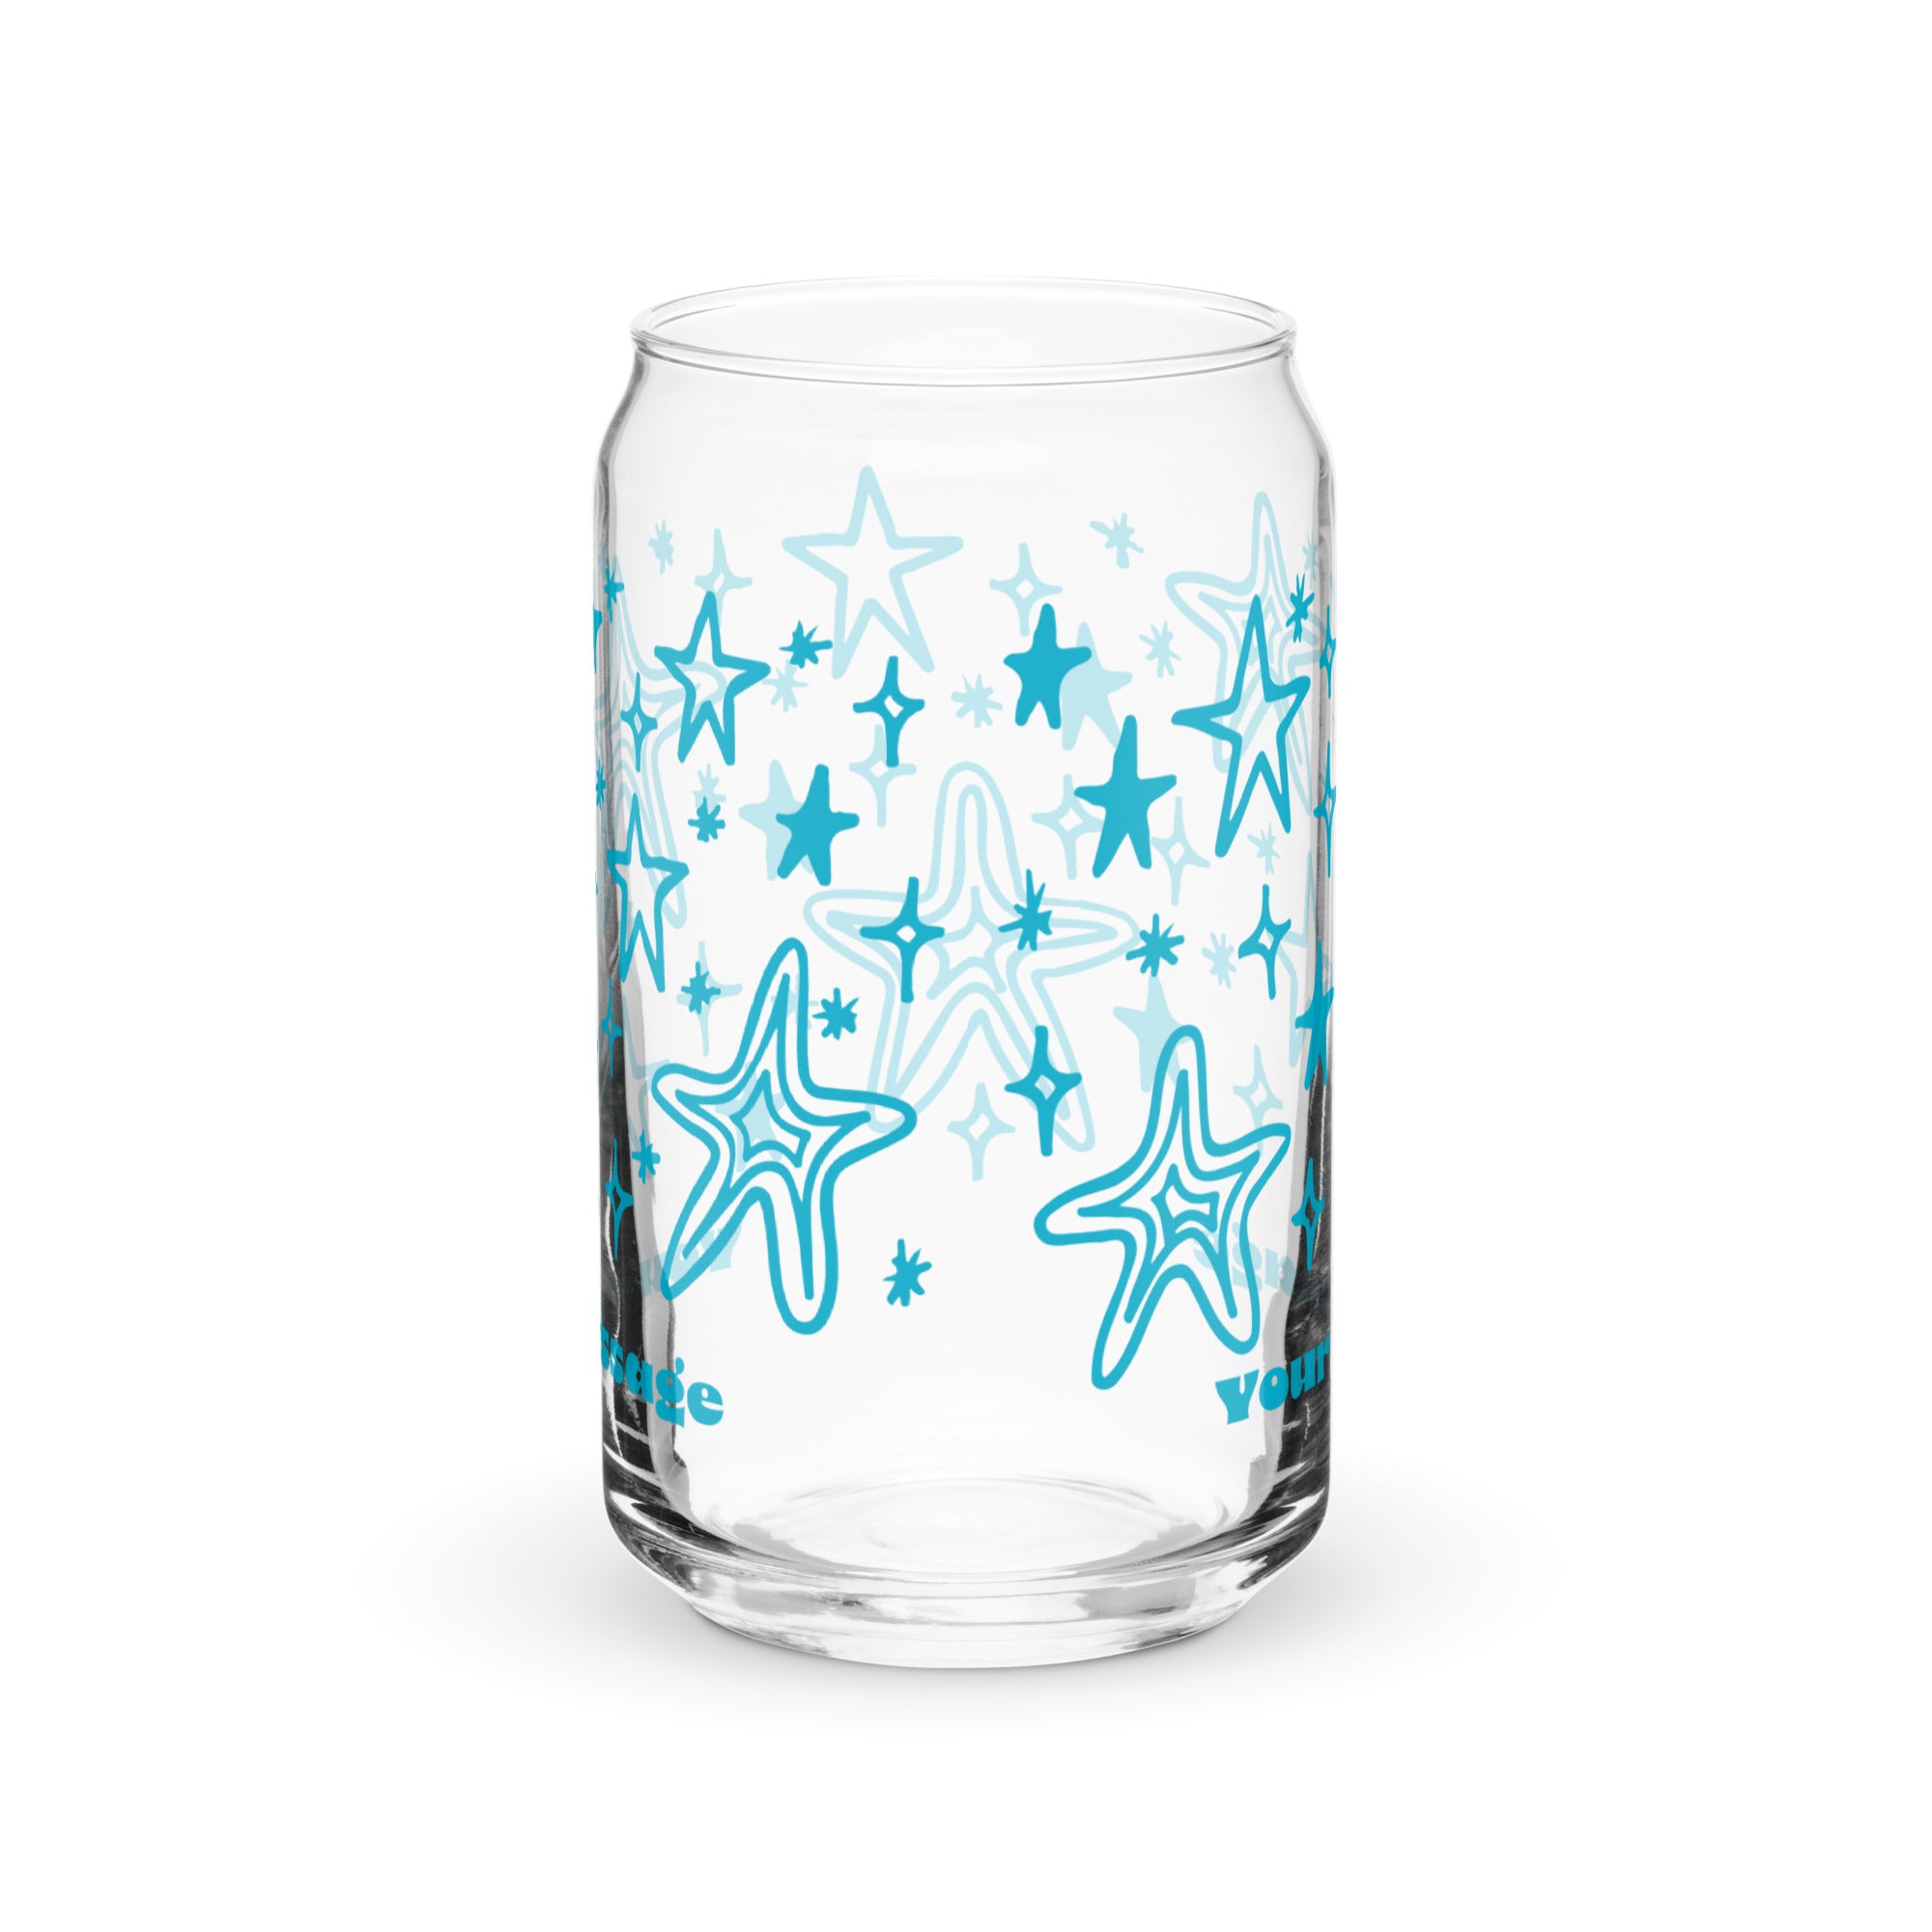 Star Print Glass with Personalized Message